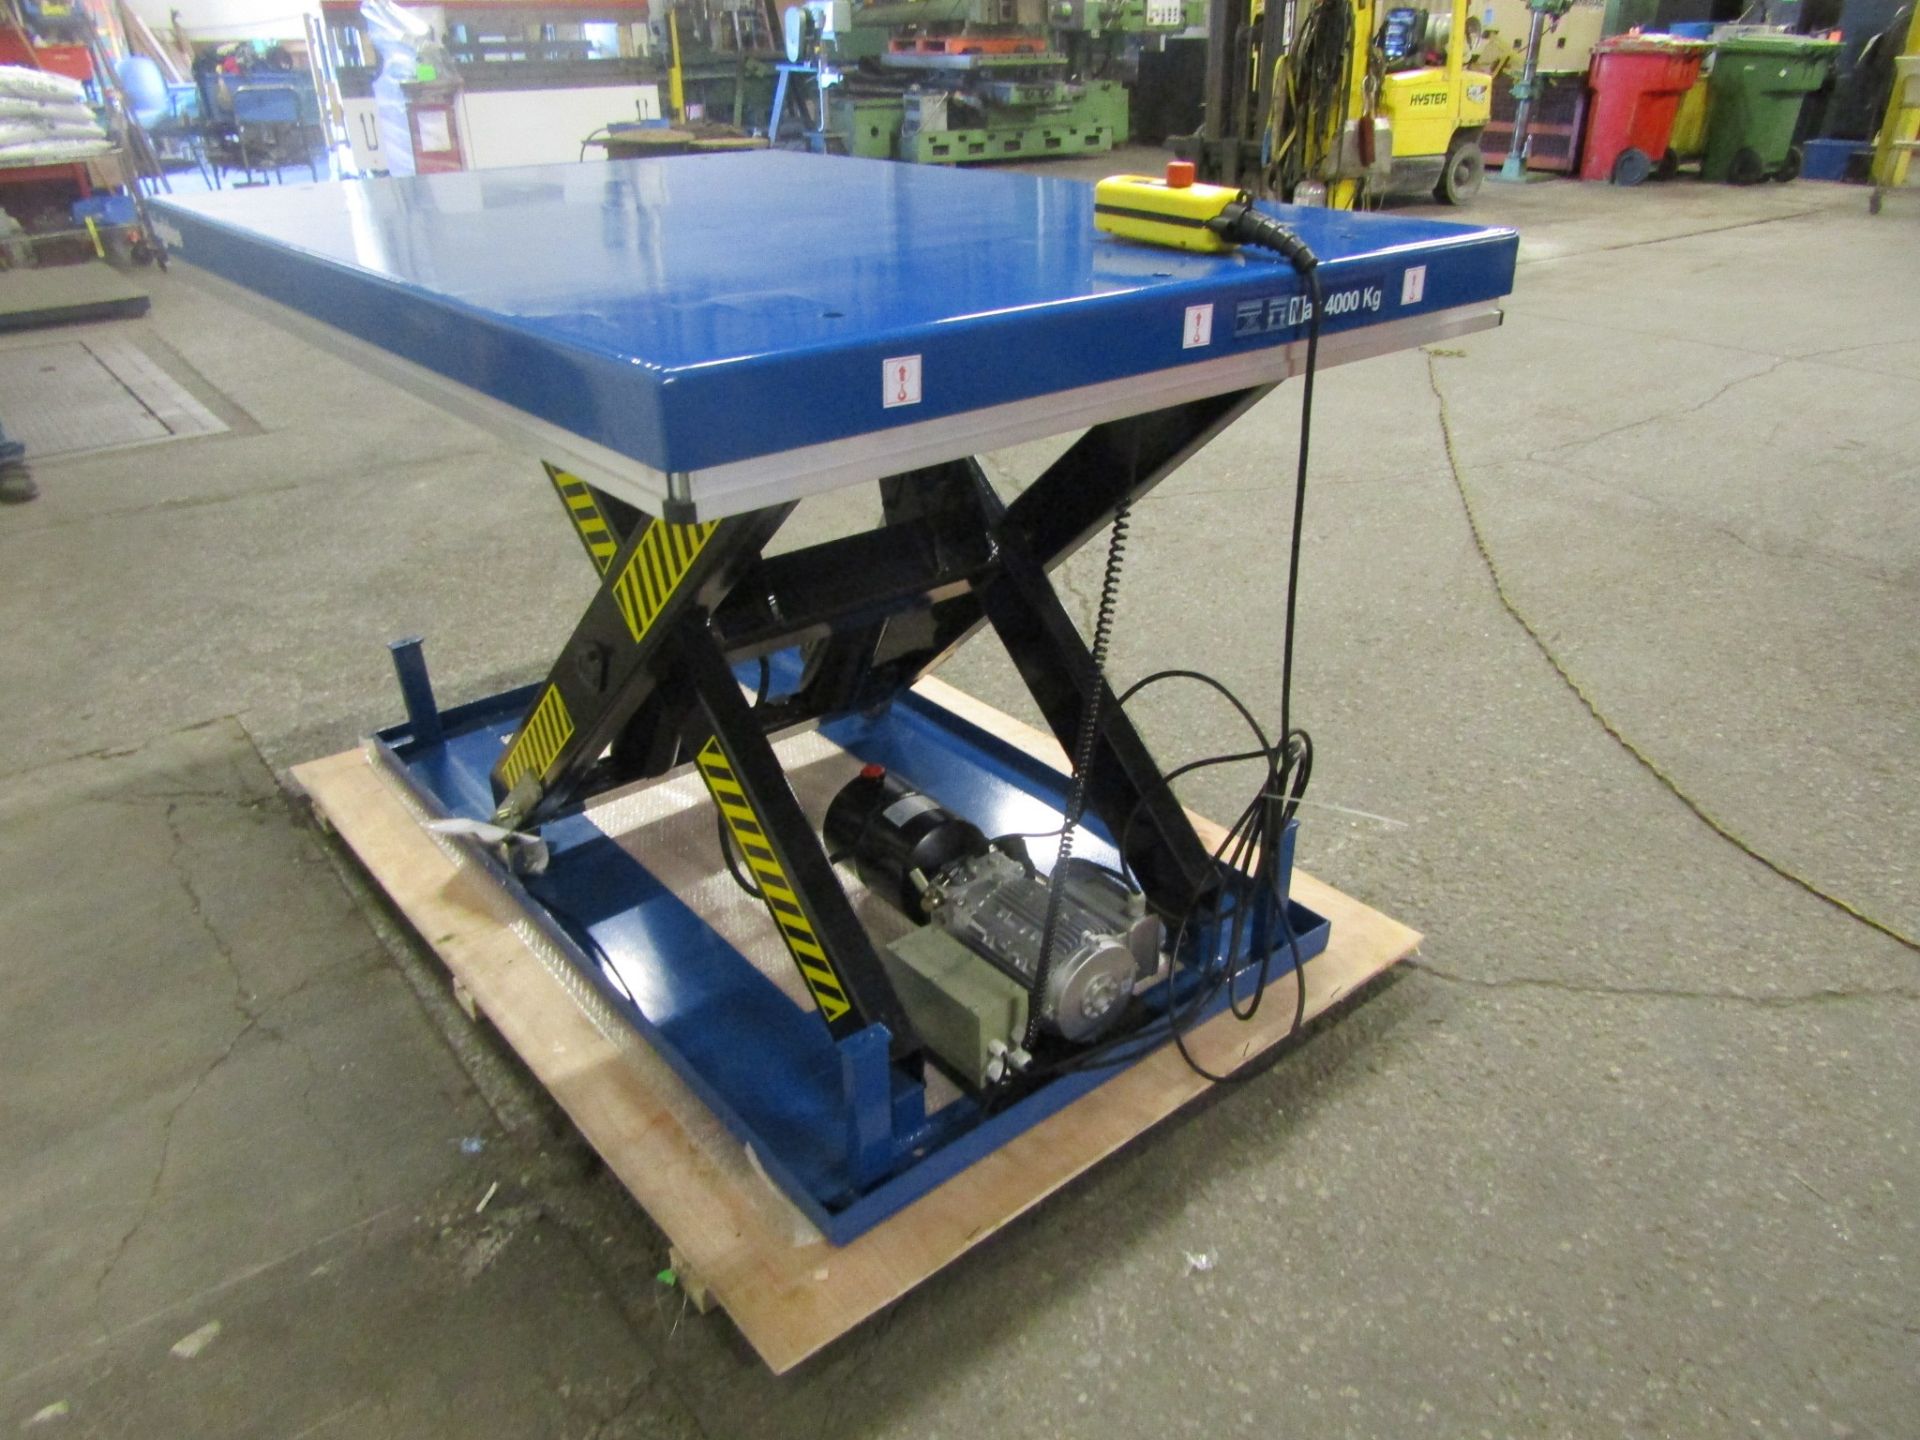 HW Hydraulic Lift Table 32" x 52" x 40" lift - 4000lbs capacity - UNUSED and MINT - 115V - Image 2 of 2